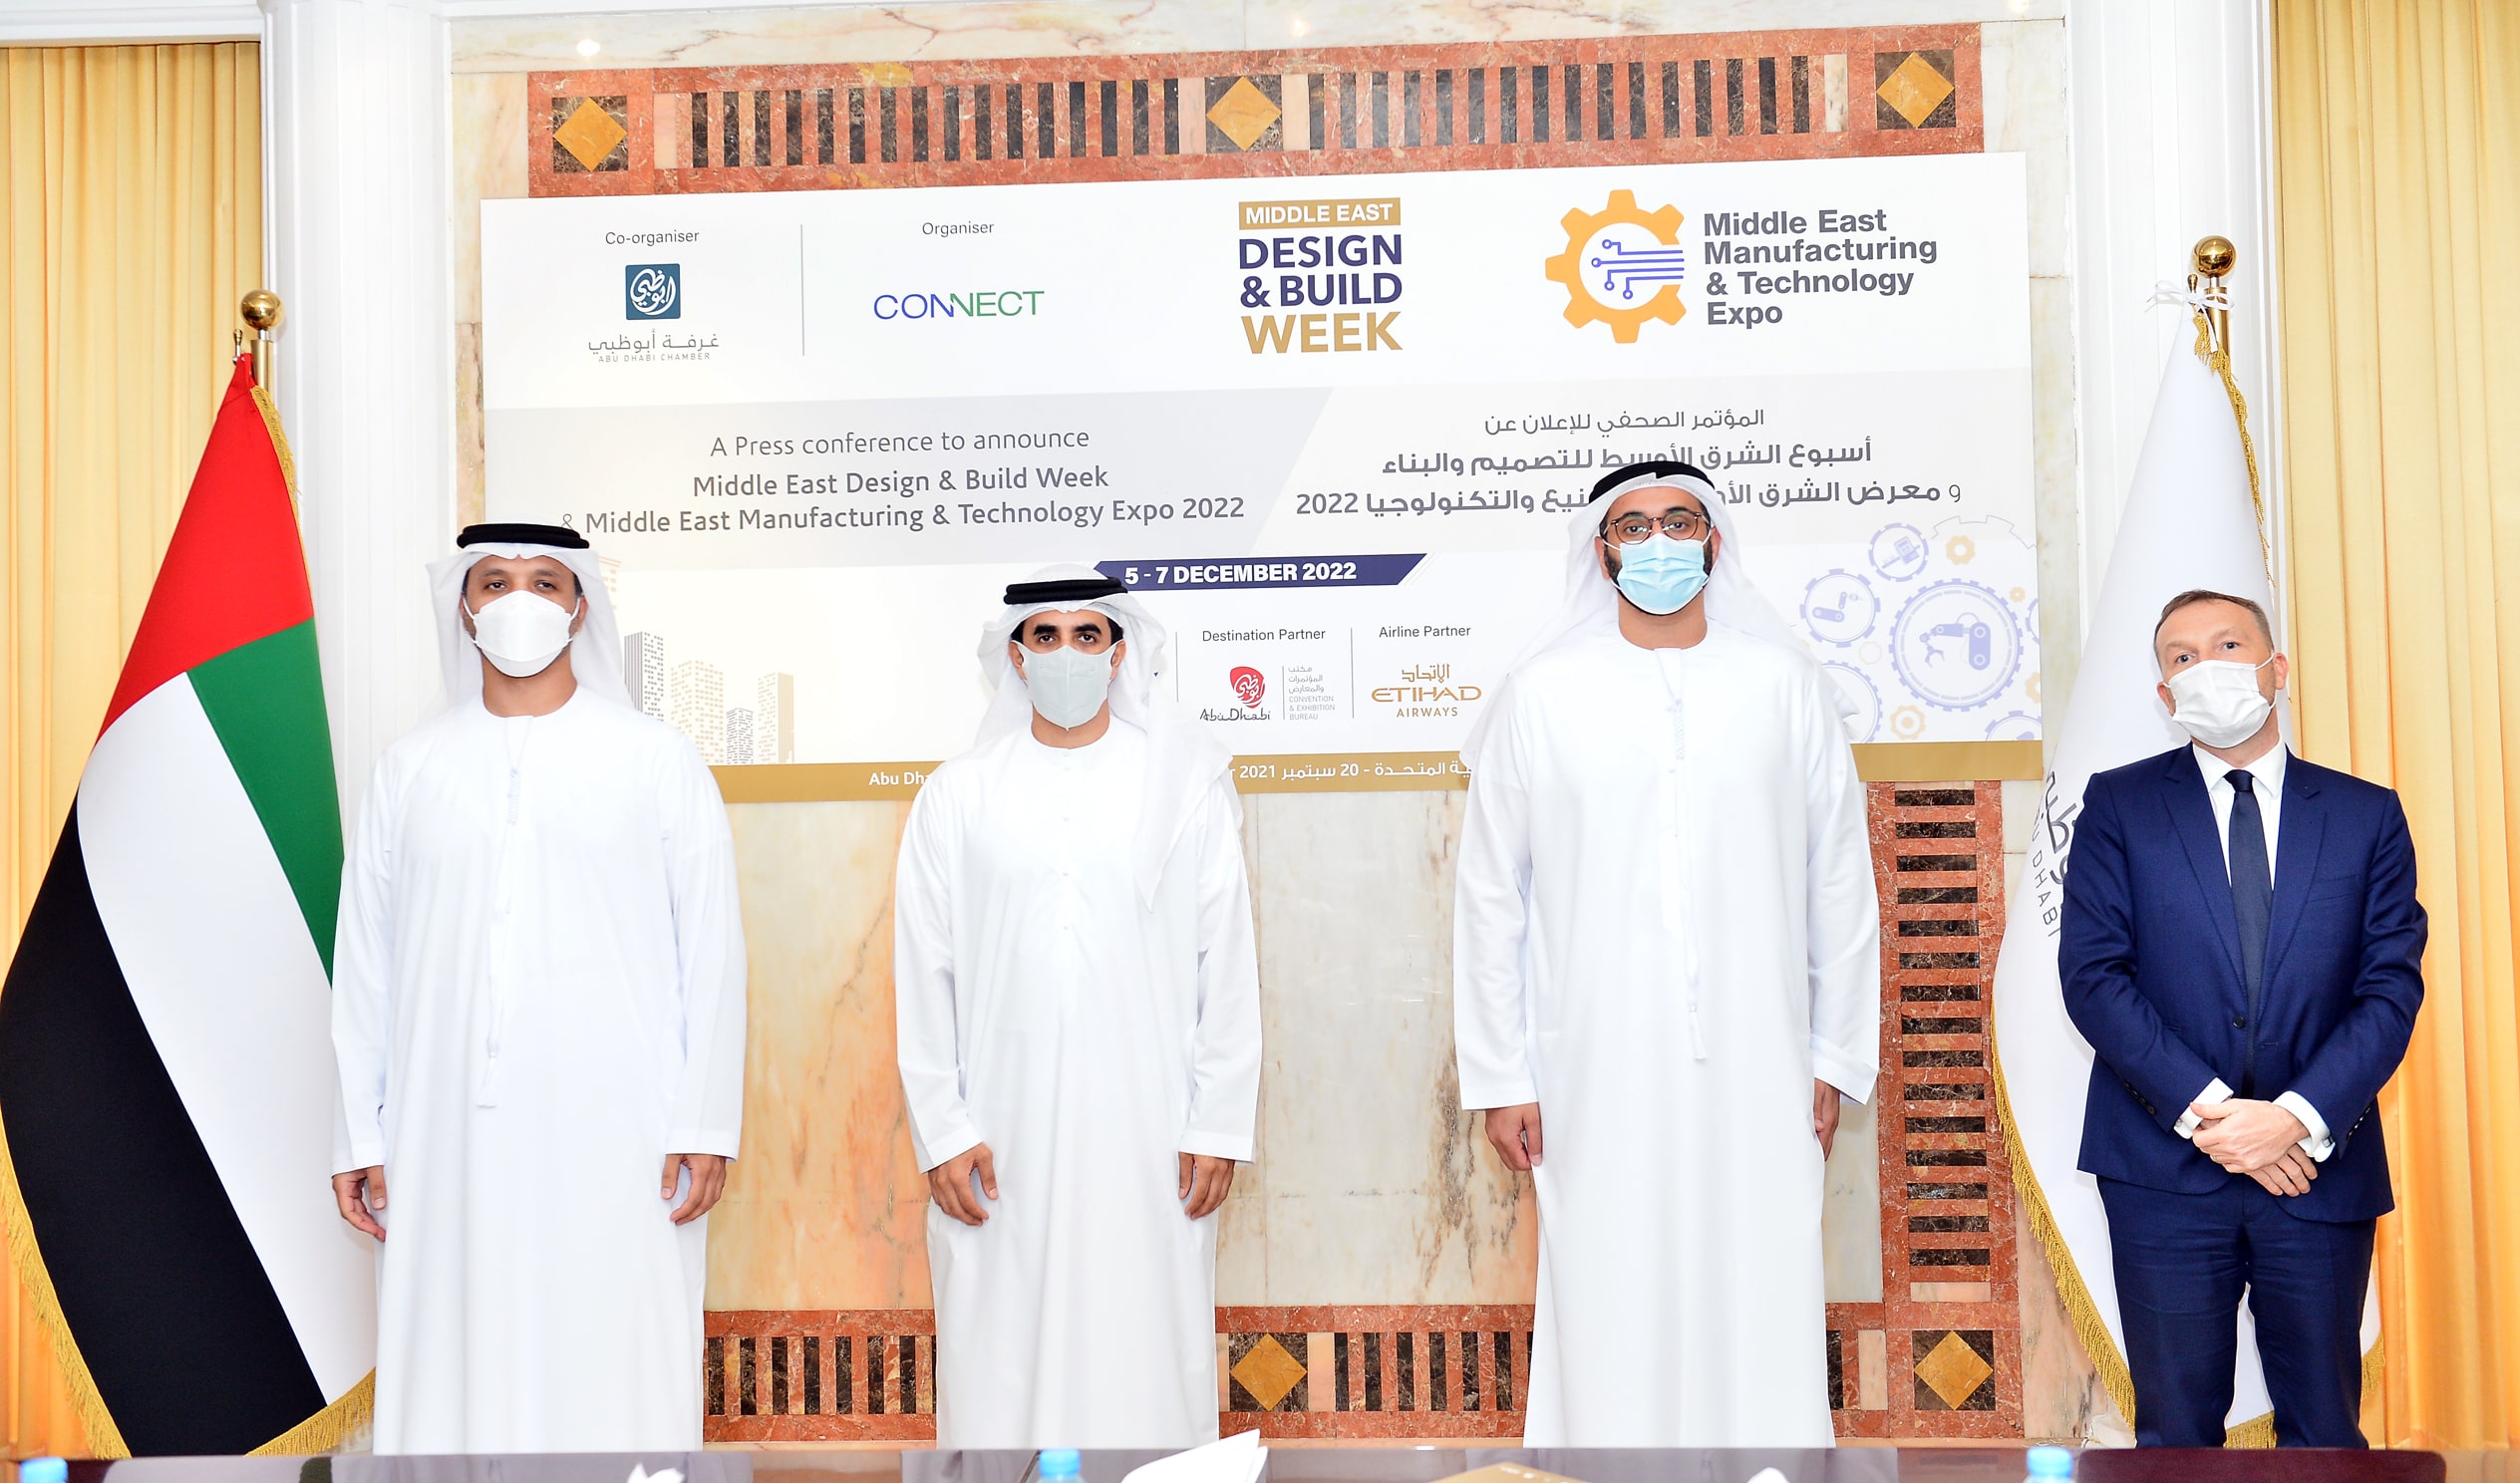 Abu Dhabi Chamber of Commerce & Industry and CONNECT announce the launch of international events in Abu Dhabi for the construction and manufacturing industries.